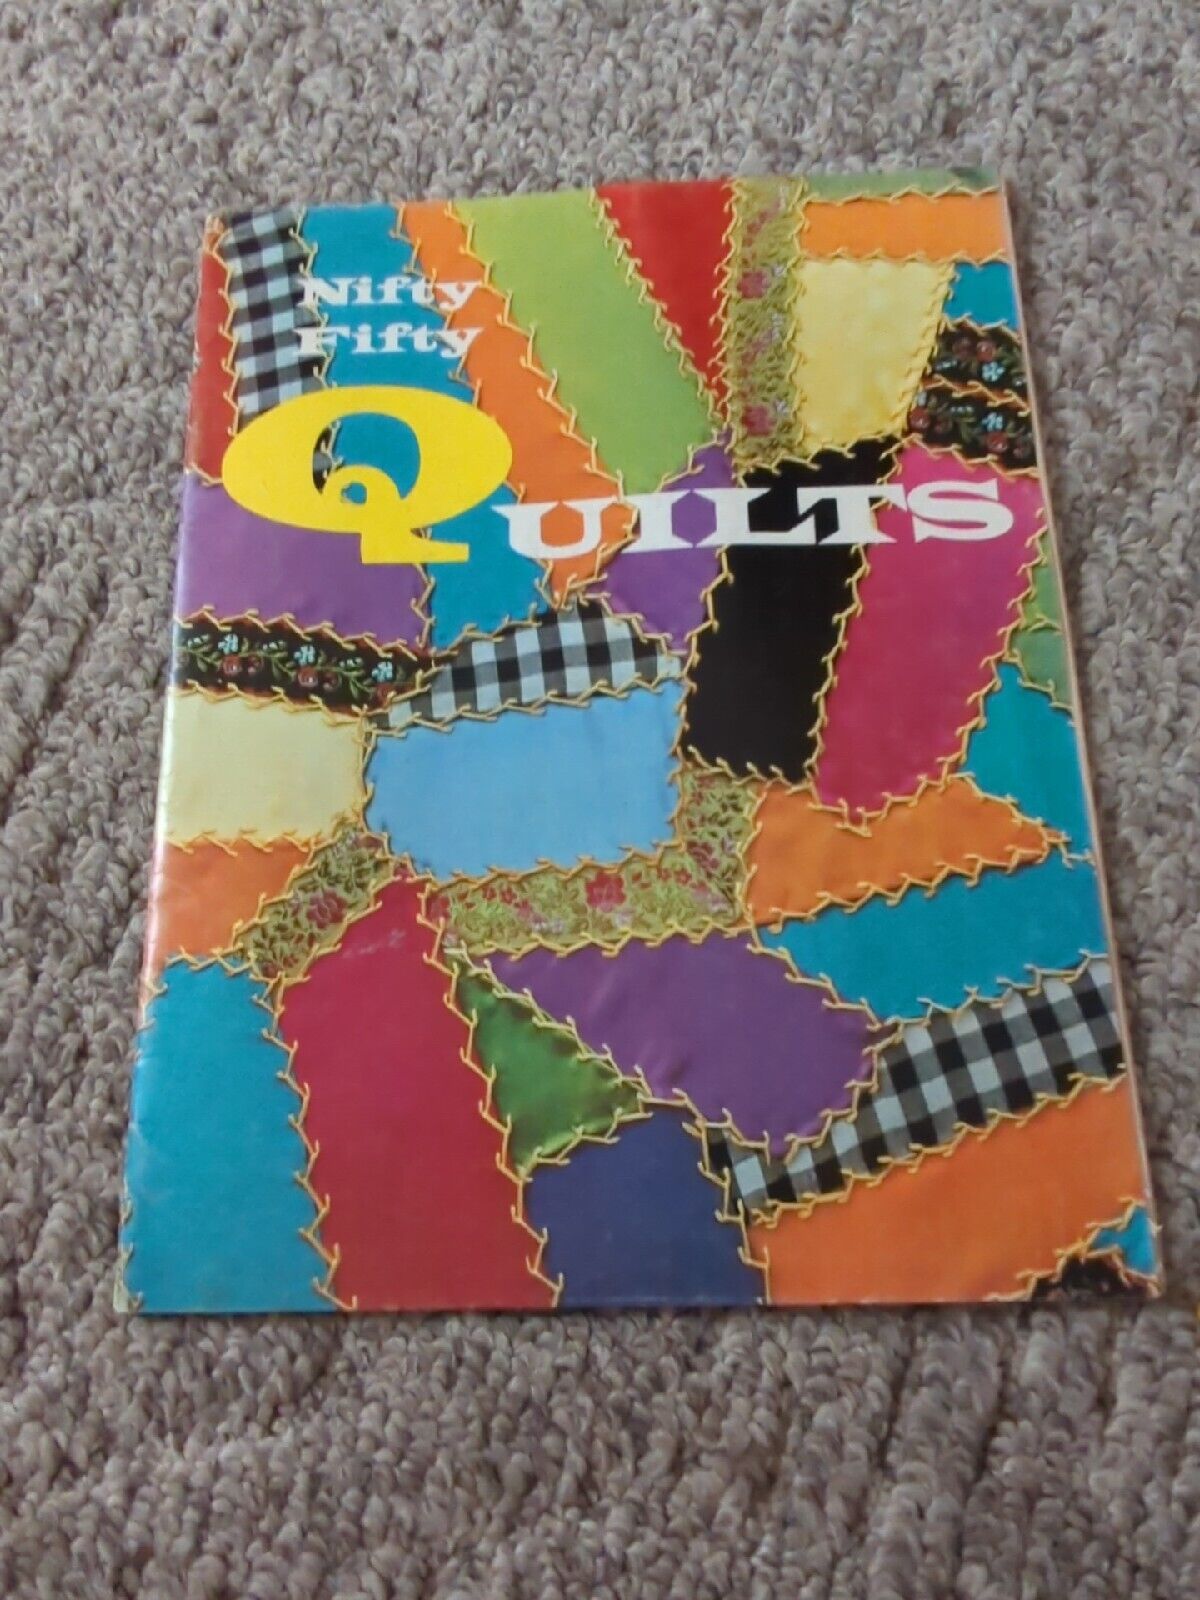 Nifty Fifty Quilts 1974 How To Make Pieced And Applique Quilts Booklet